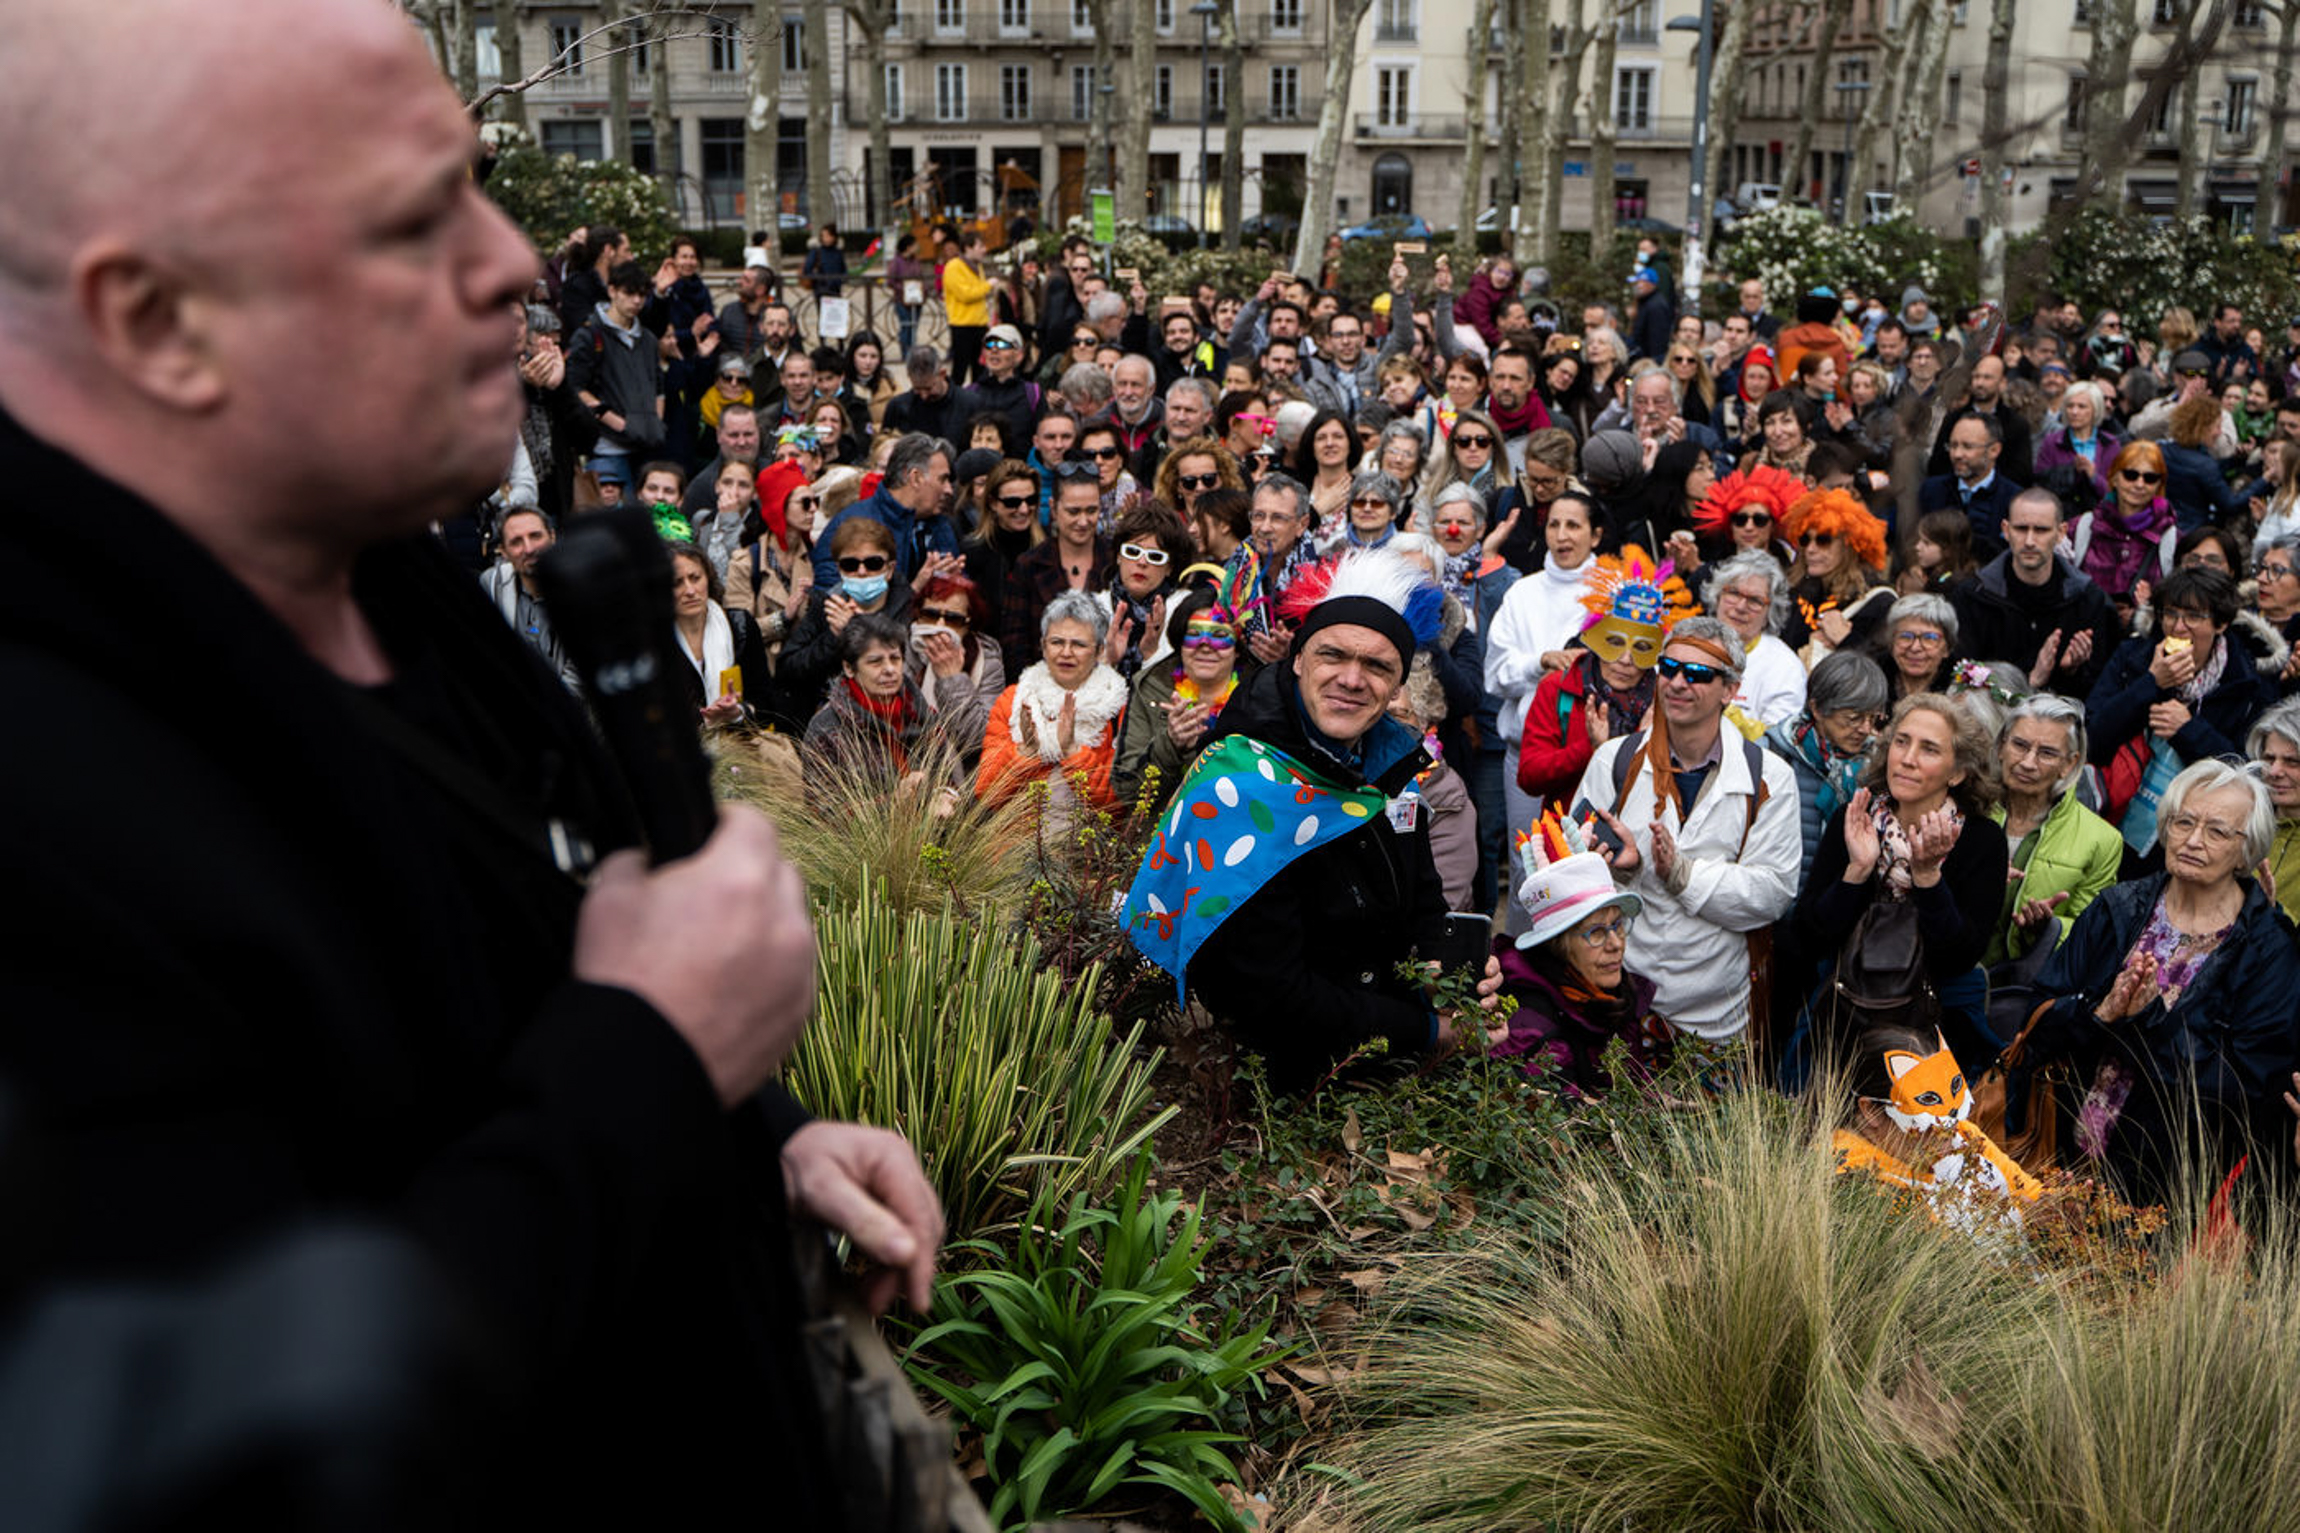 Carlo Alberto Brusa, considered an "anti-vaccine star", delivers a speech at the Libert Air rally against mask-wearing and pandemic restrictions. Lyon, France, 13 March 2021 (Nicolas Liponne)